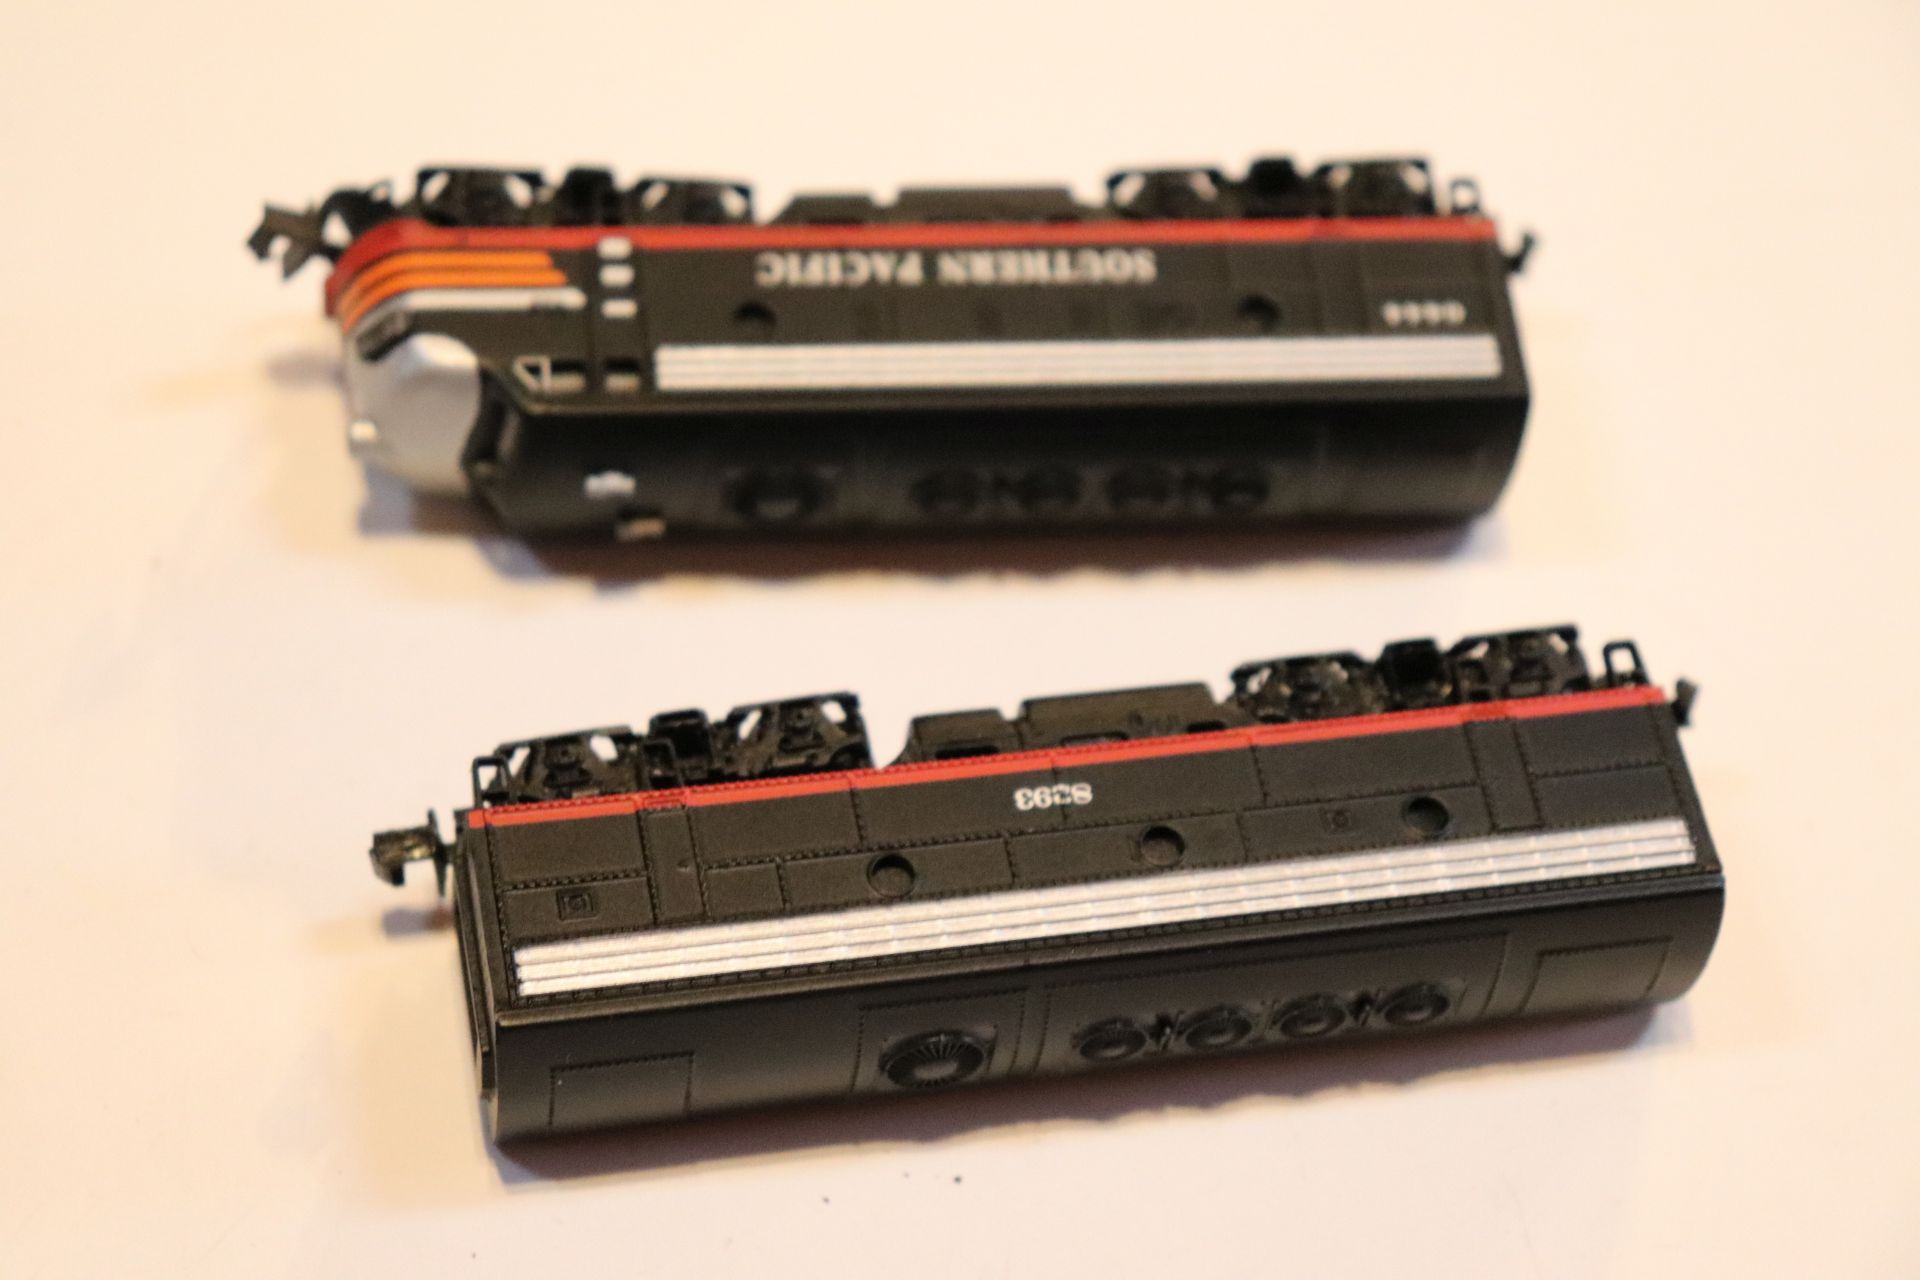 Bachmann locomotive, Southern Pacific and train car, N scale - Image 3 of 3